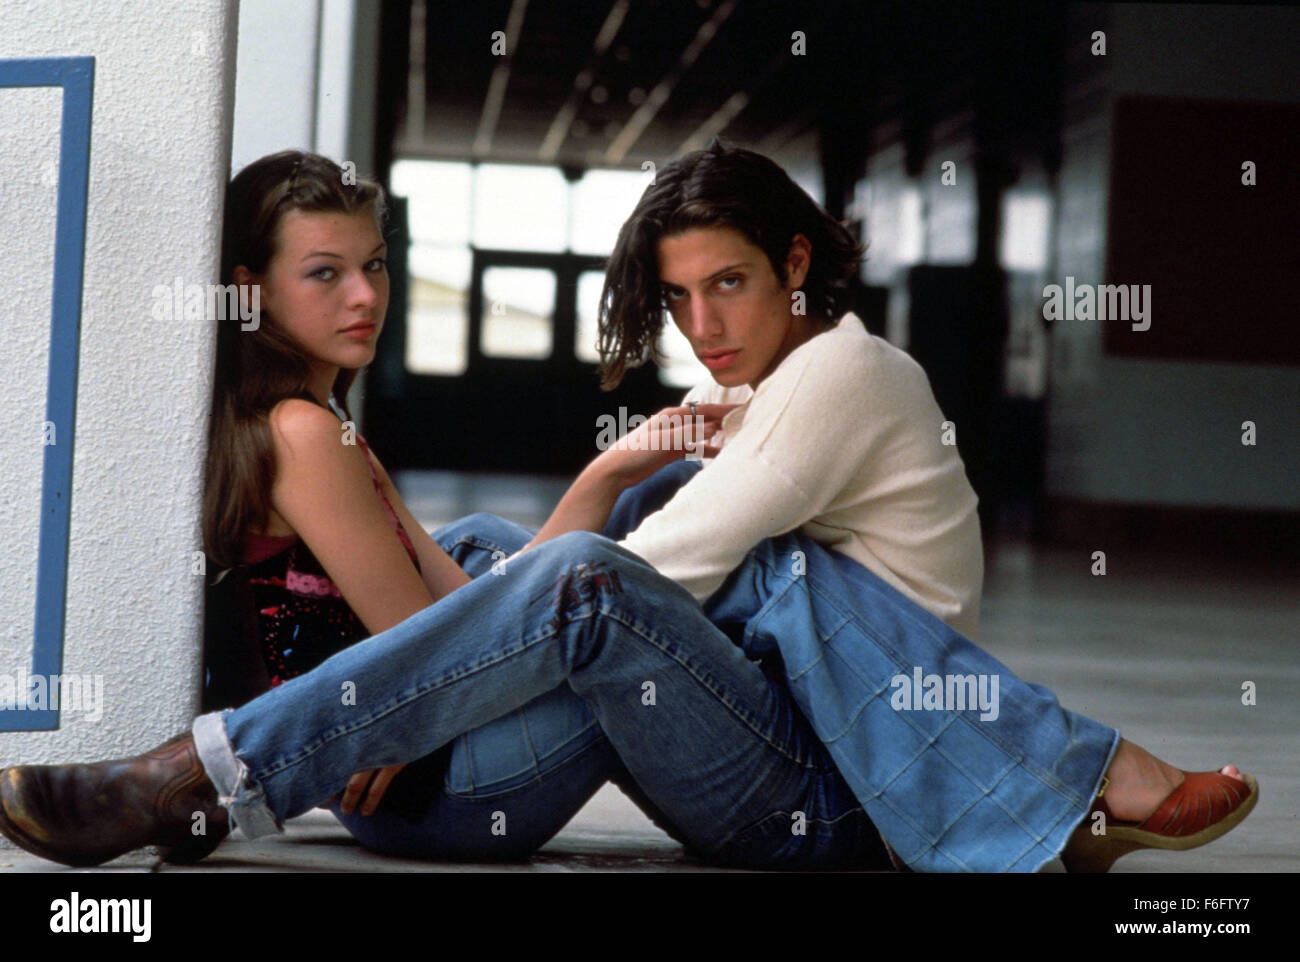 Sep 10, 1993; Austin, TX, USA; MILLA JOVOVICH and SHAWN ANDREWS star as Michelle Burroughs and Kevin Pickford in the comedy drama 'Dazed and Confused' directed by Richard Linklater. Stock Photo